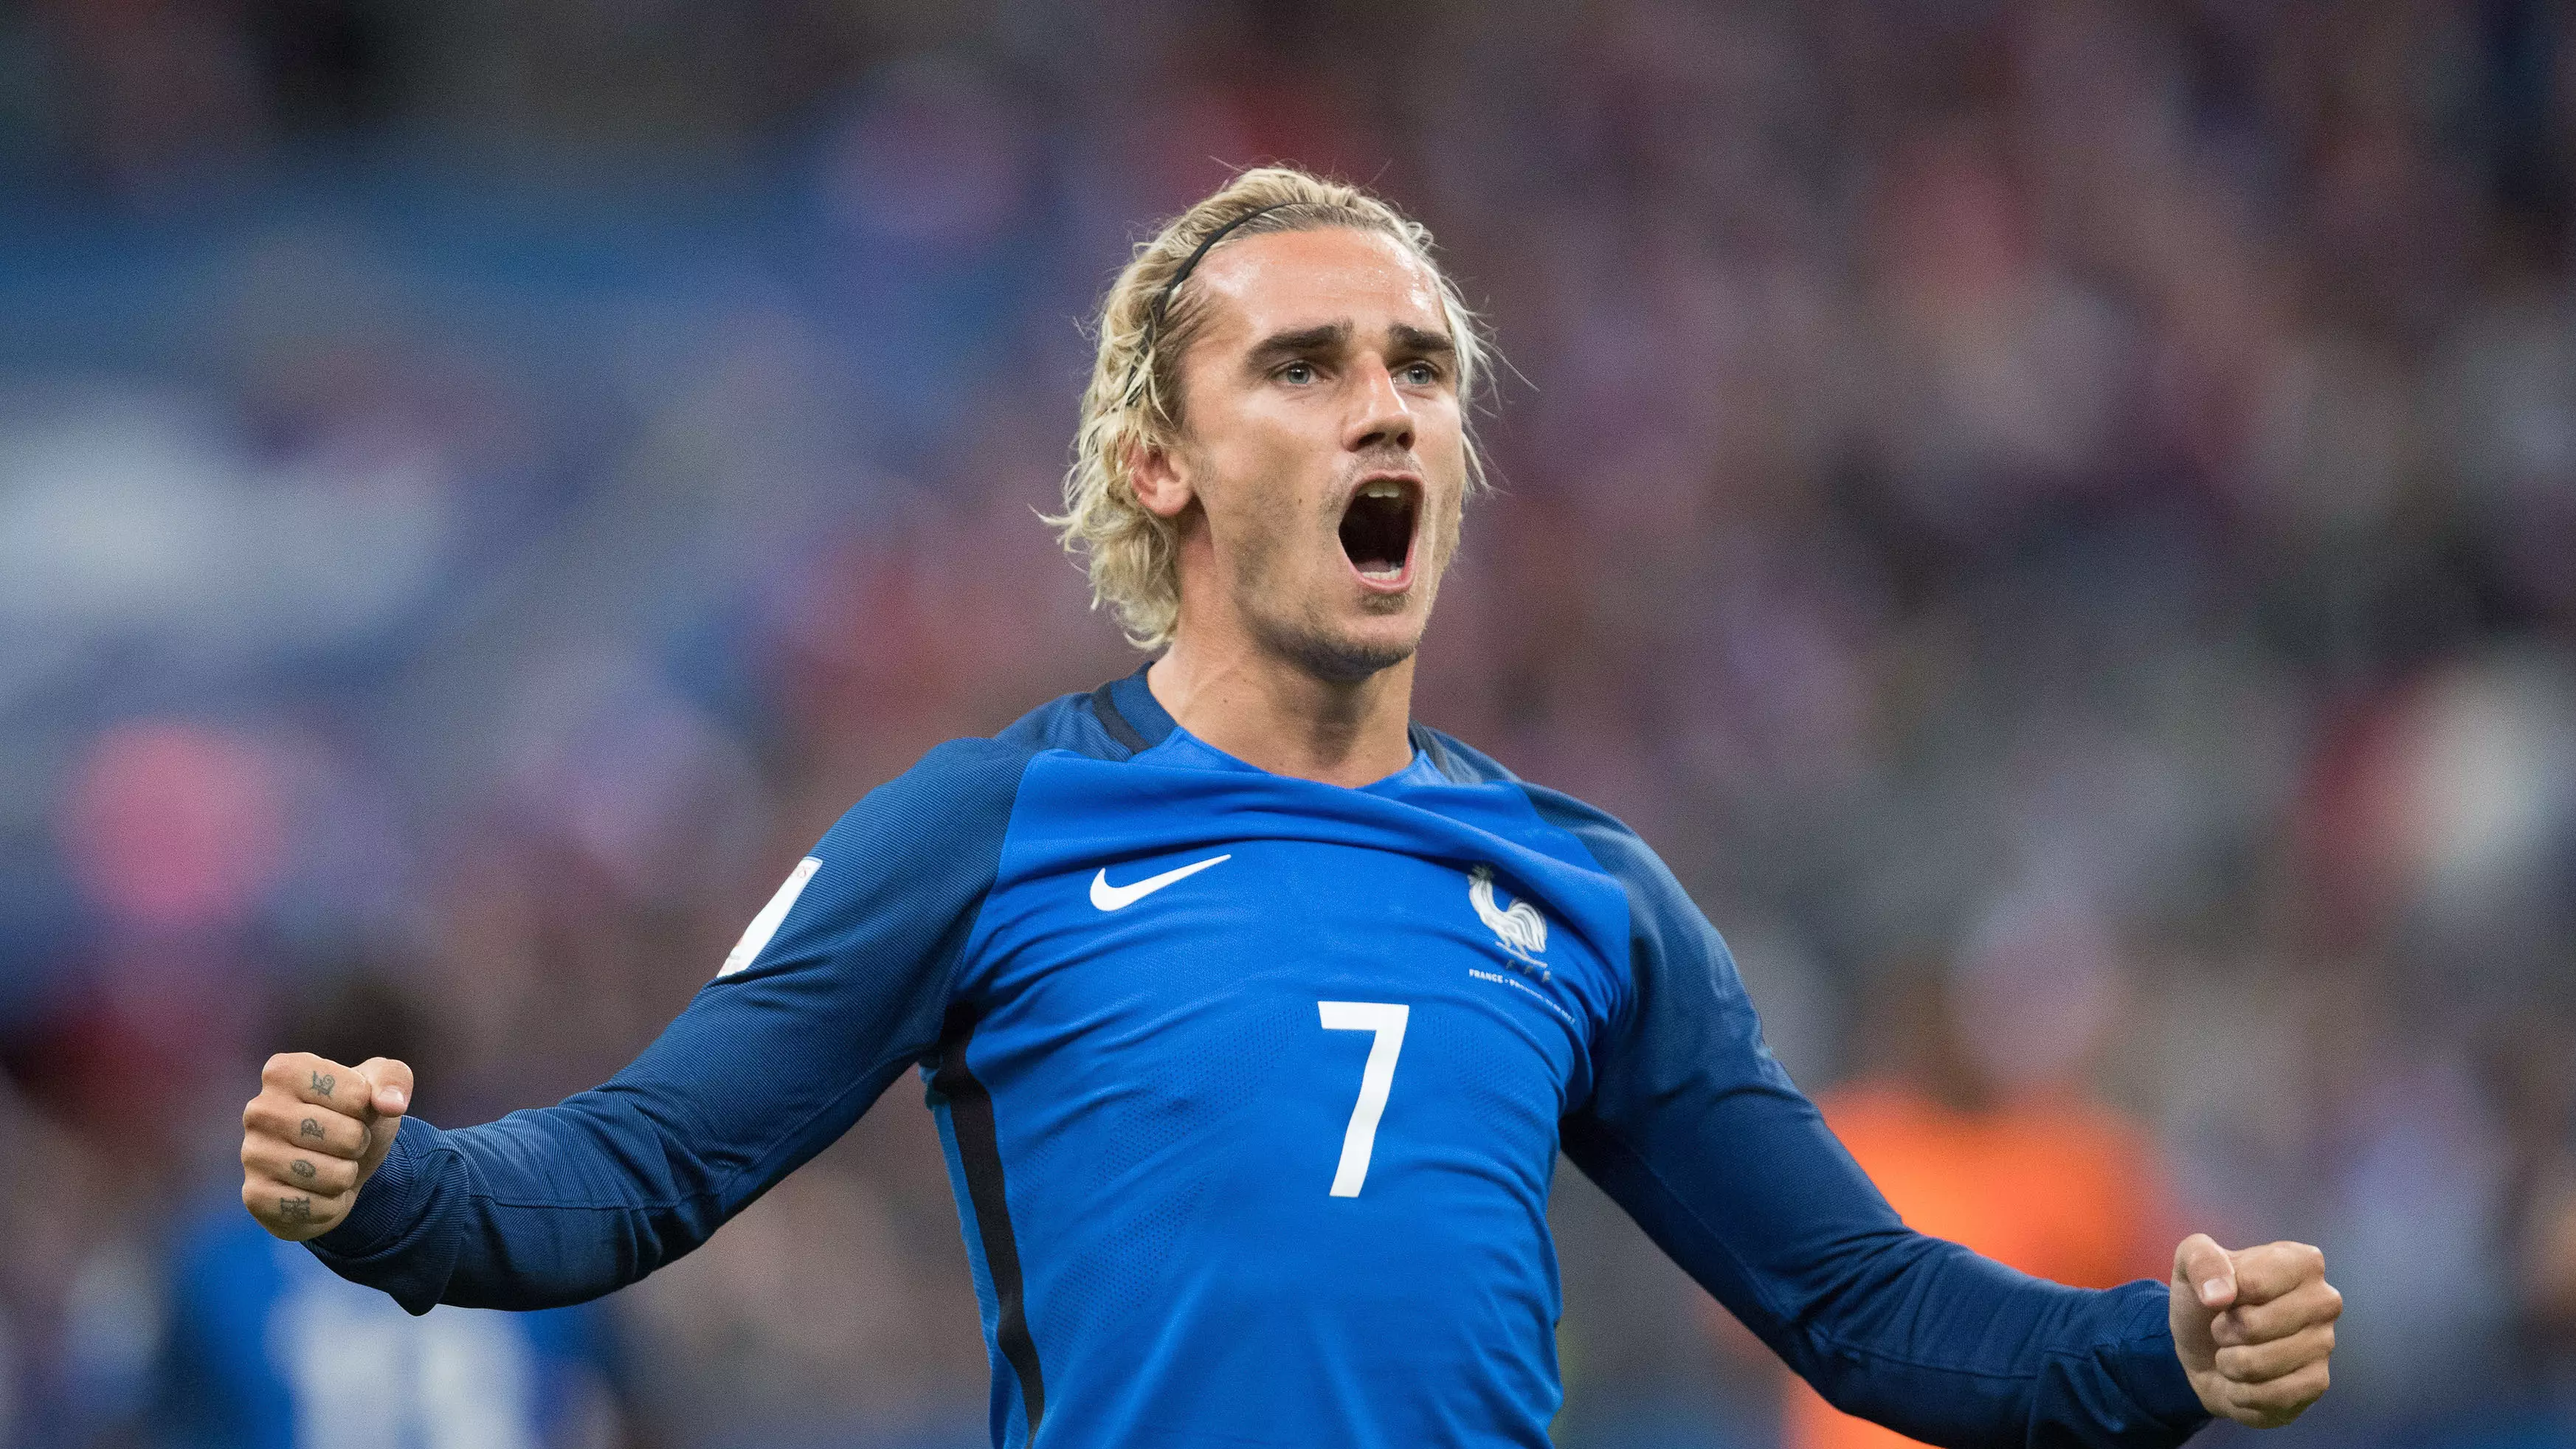 Antoine Griezmann's 99-Rated Card On FIFA 18 Is The Greatest Ever